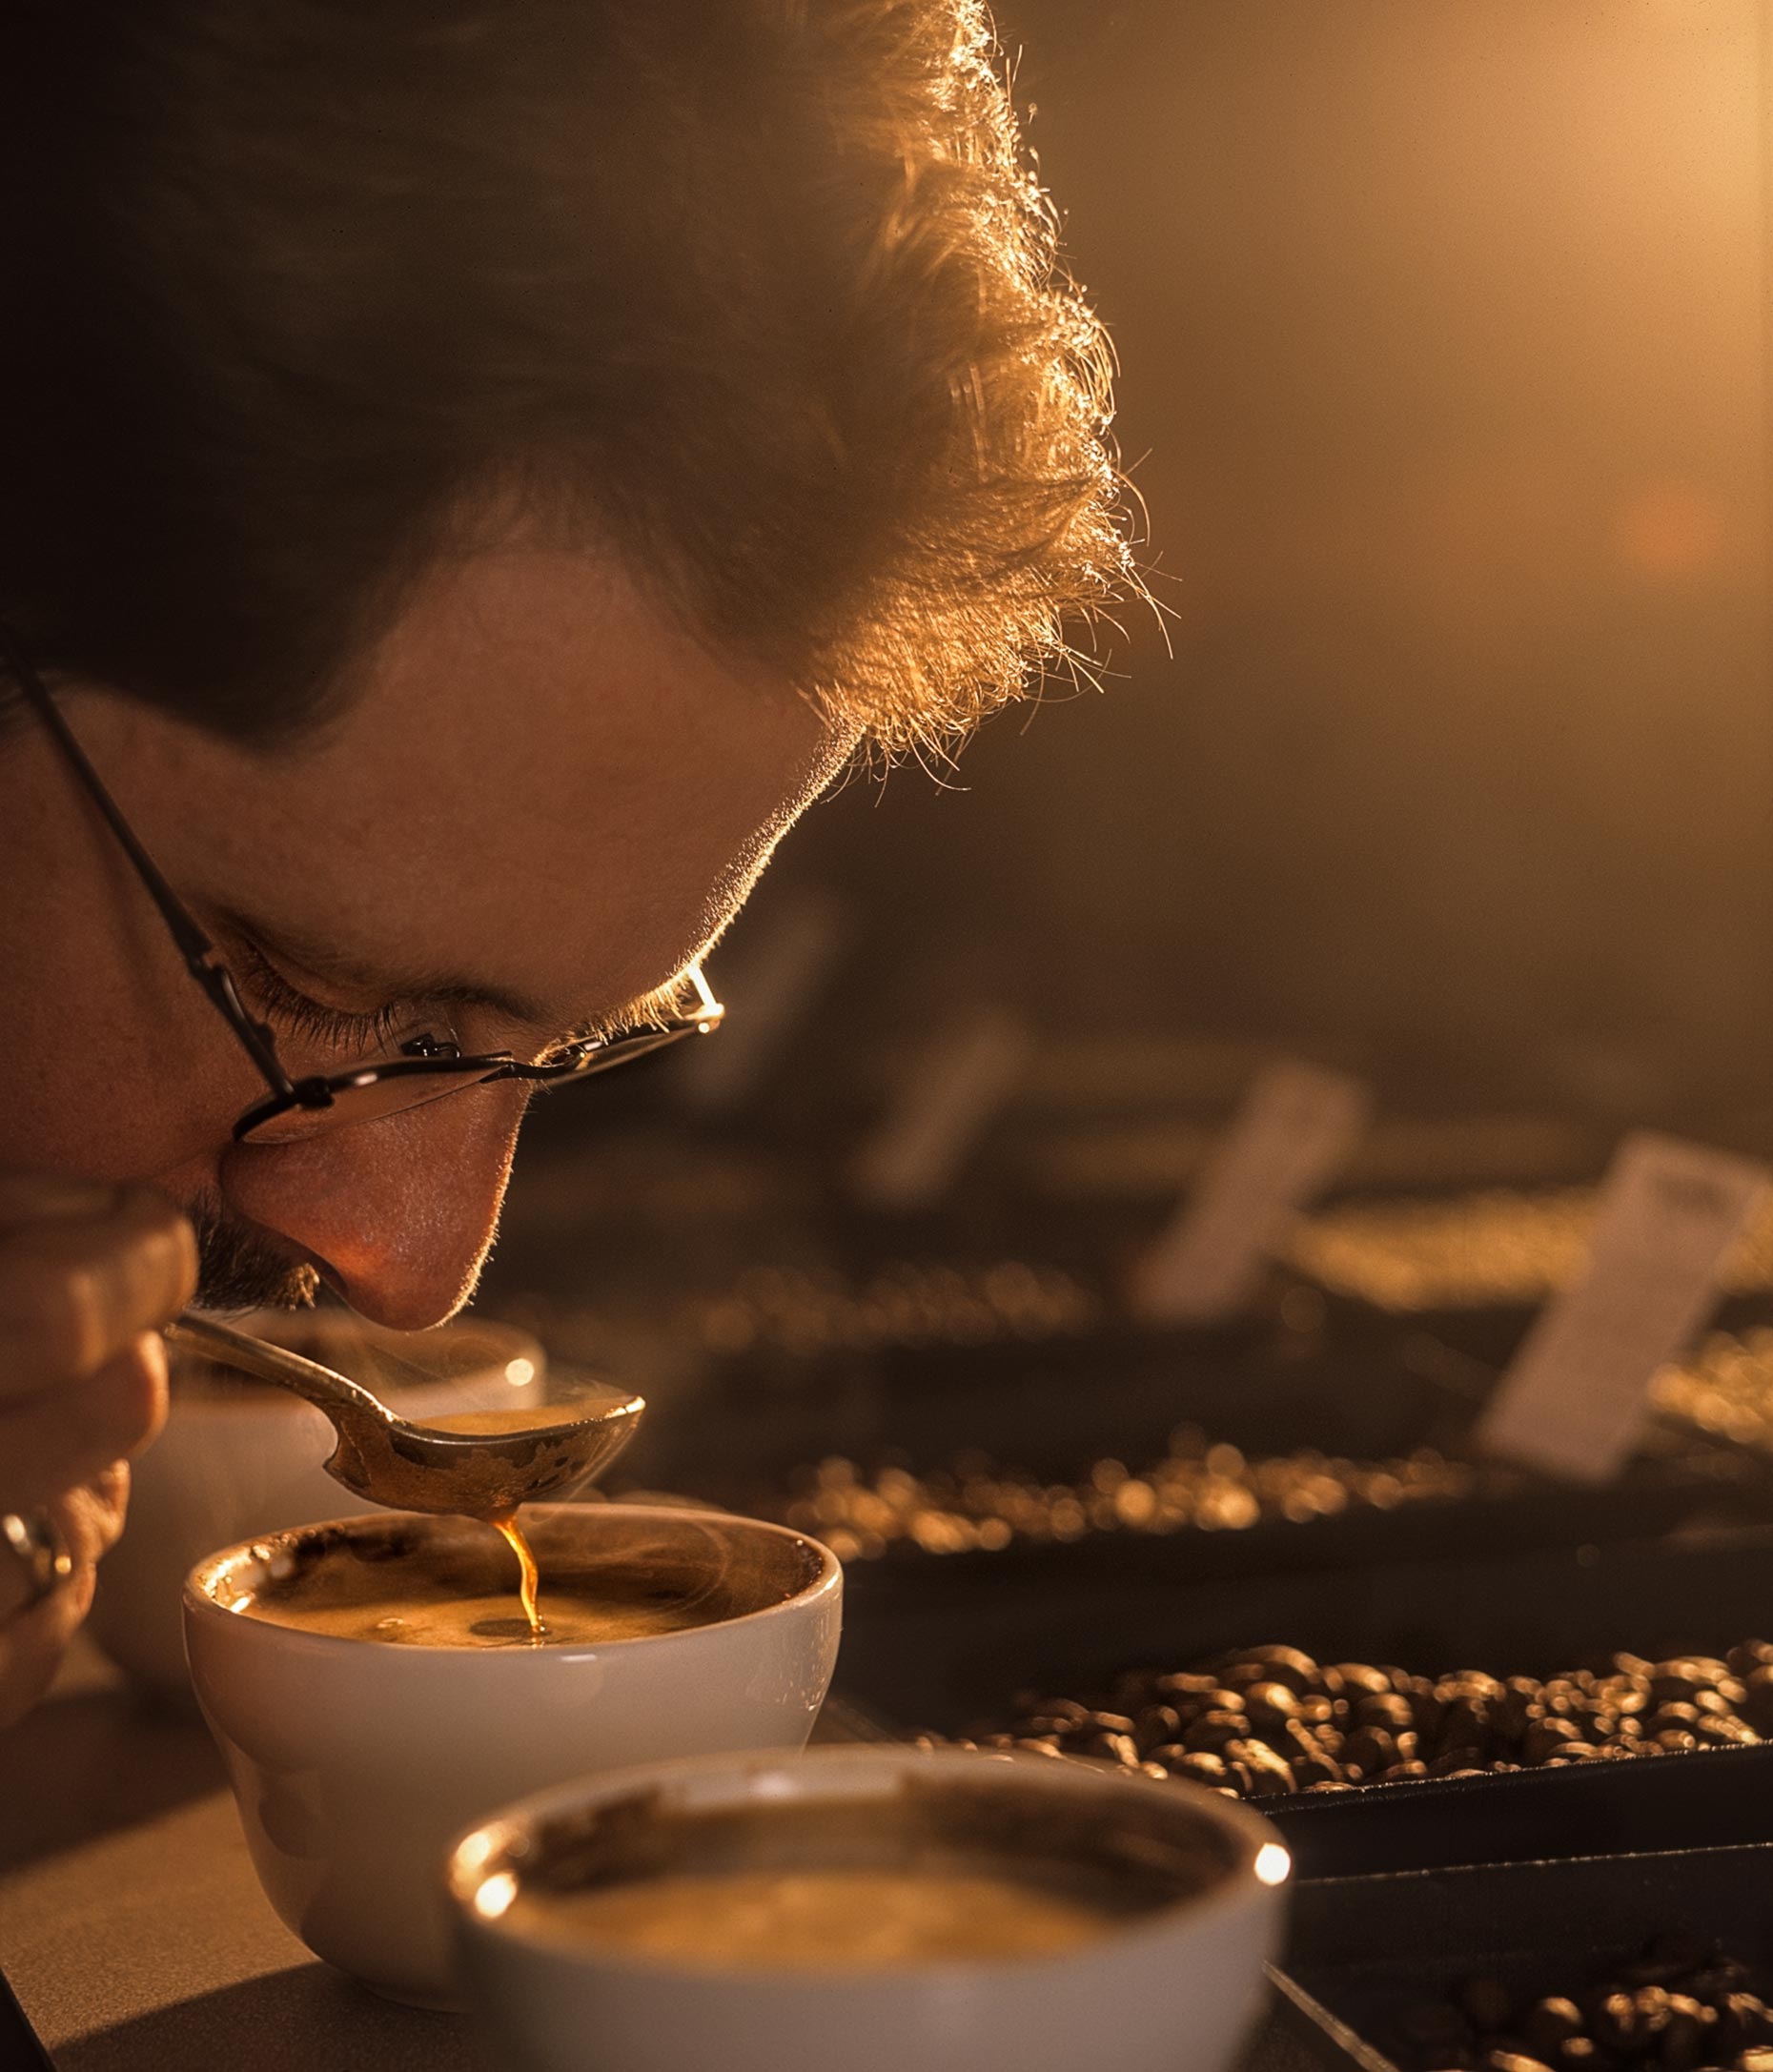 Coffee buyer tasting coffee. Agriculture photography